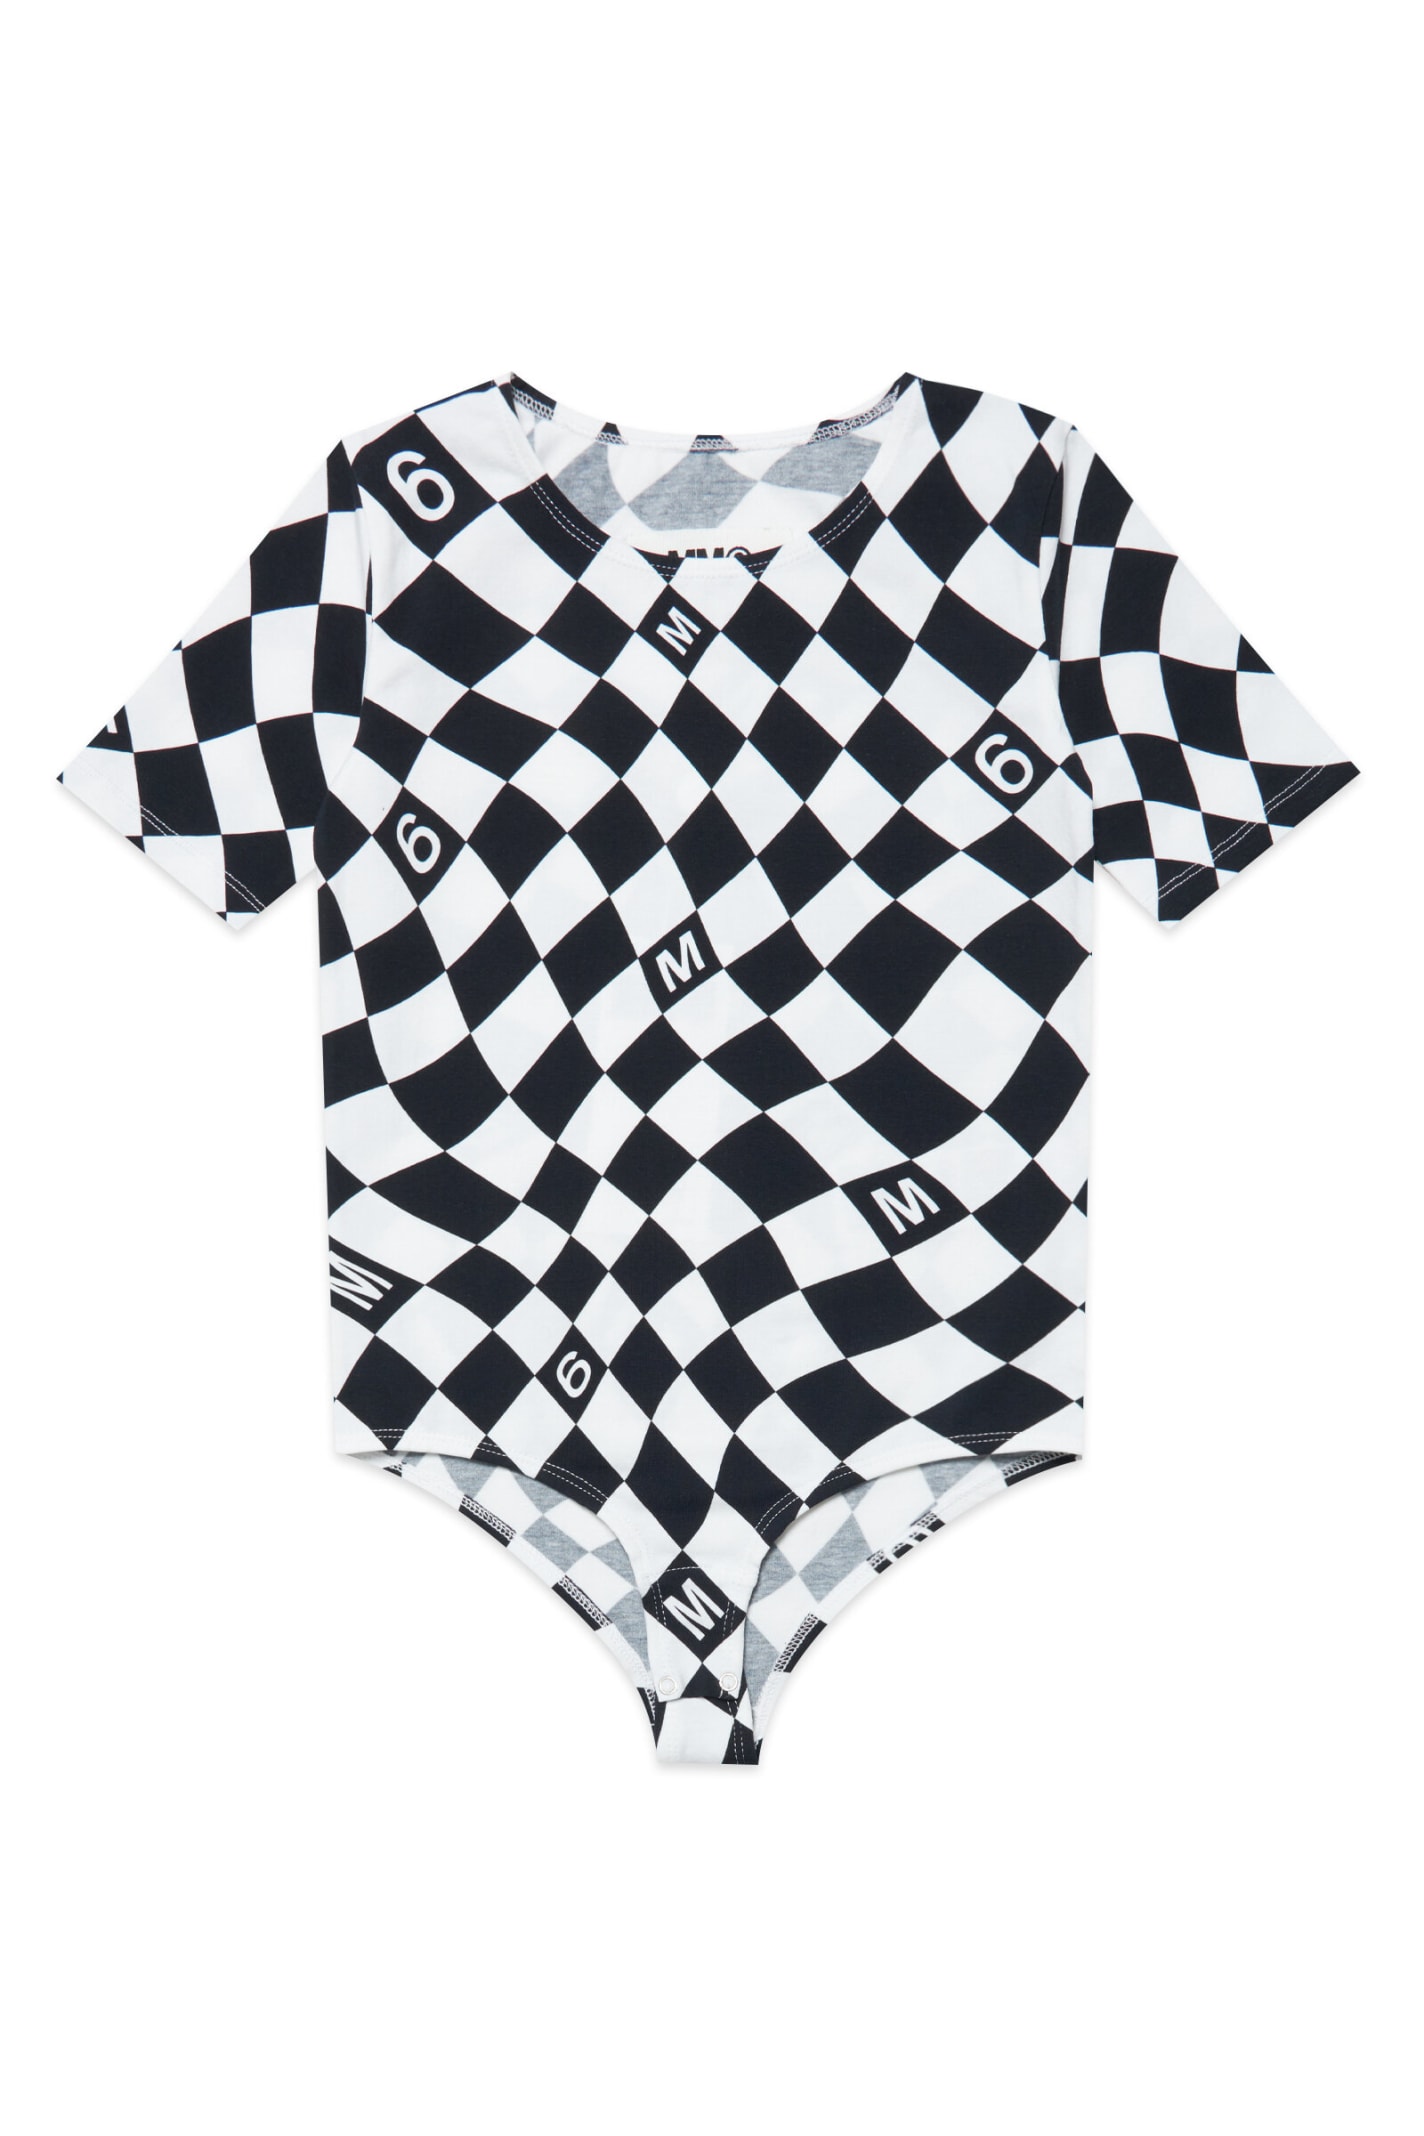 MM6 MAISON MARGIELA MM6BA5U BODY MAISON MARGIELA WHITE AND PINK SHORT-SLEEVED BODYSUIT IN JERSEY WITH CHEQUERED PATTERN